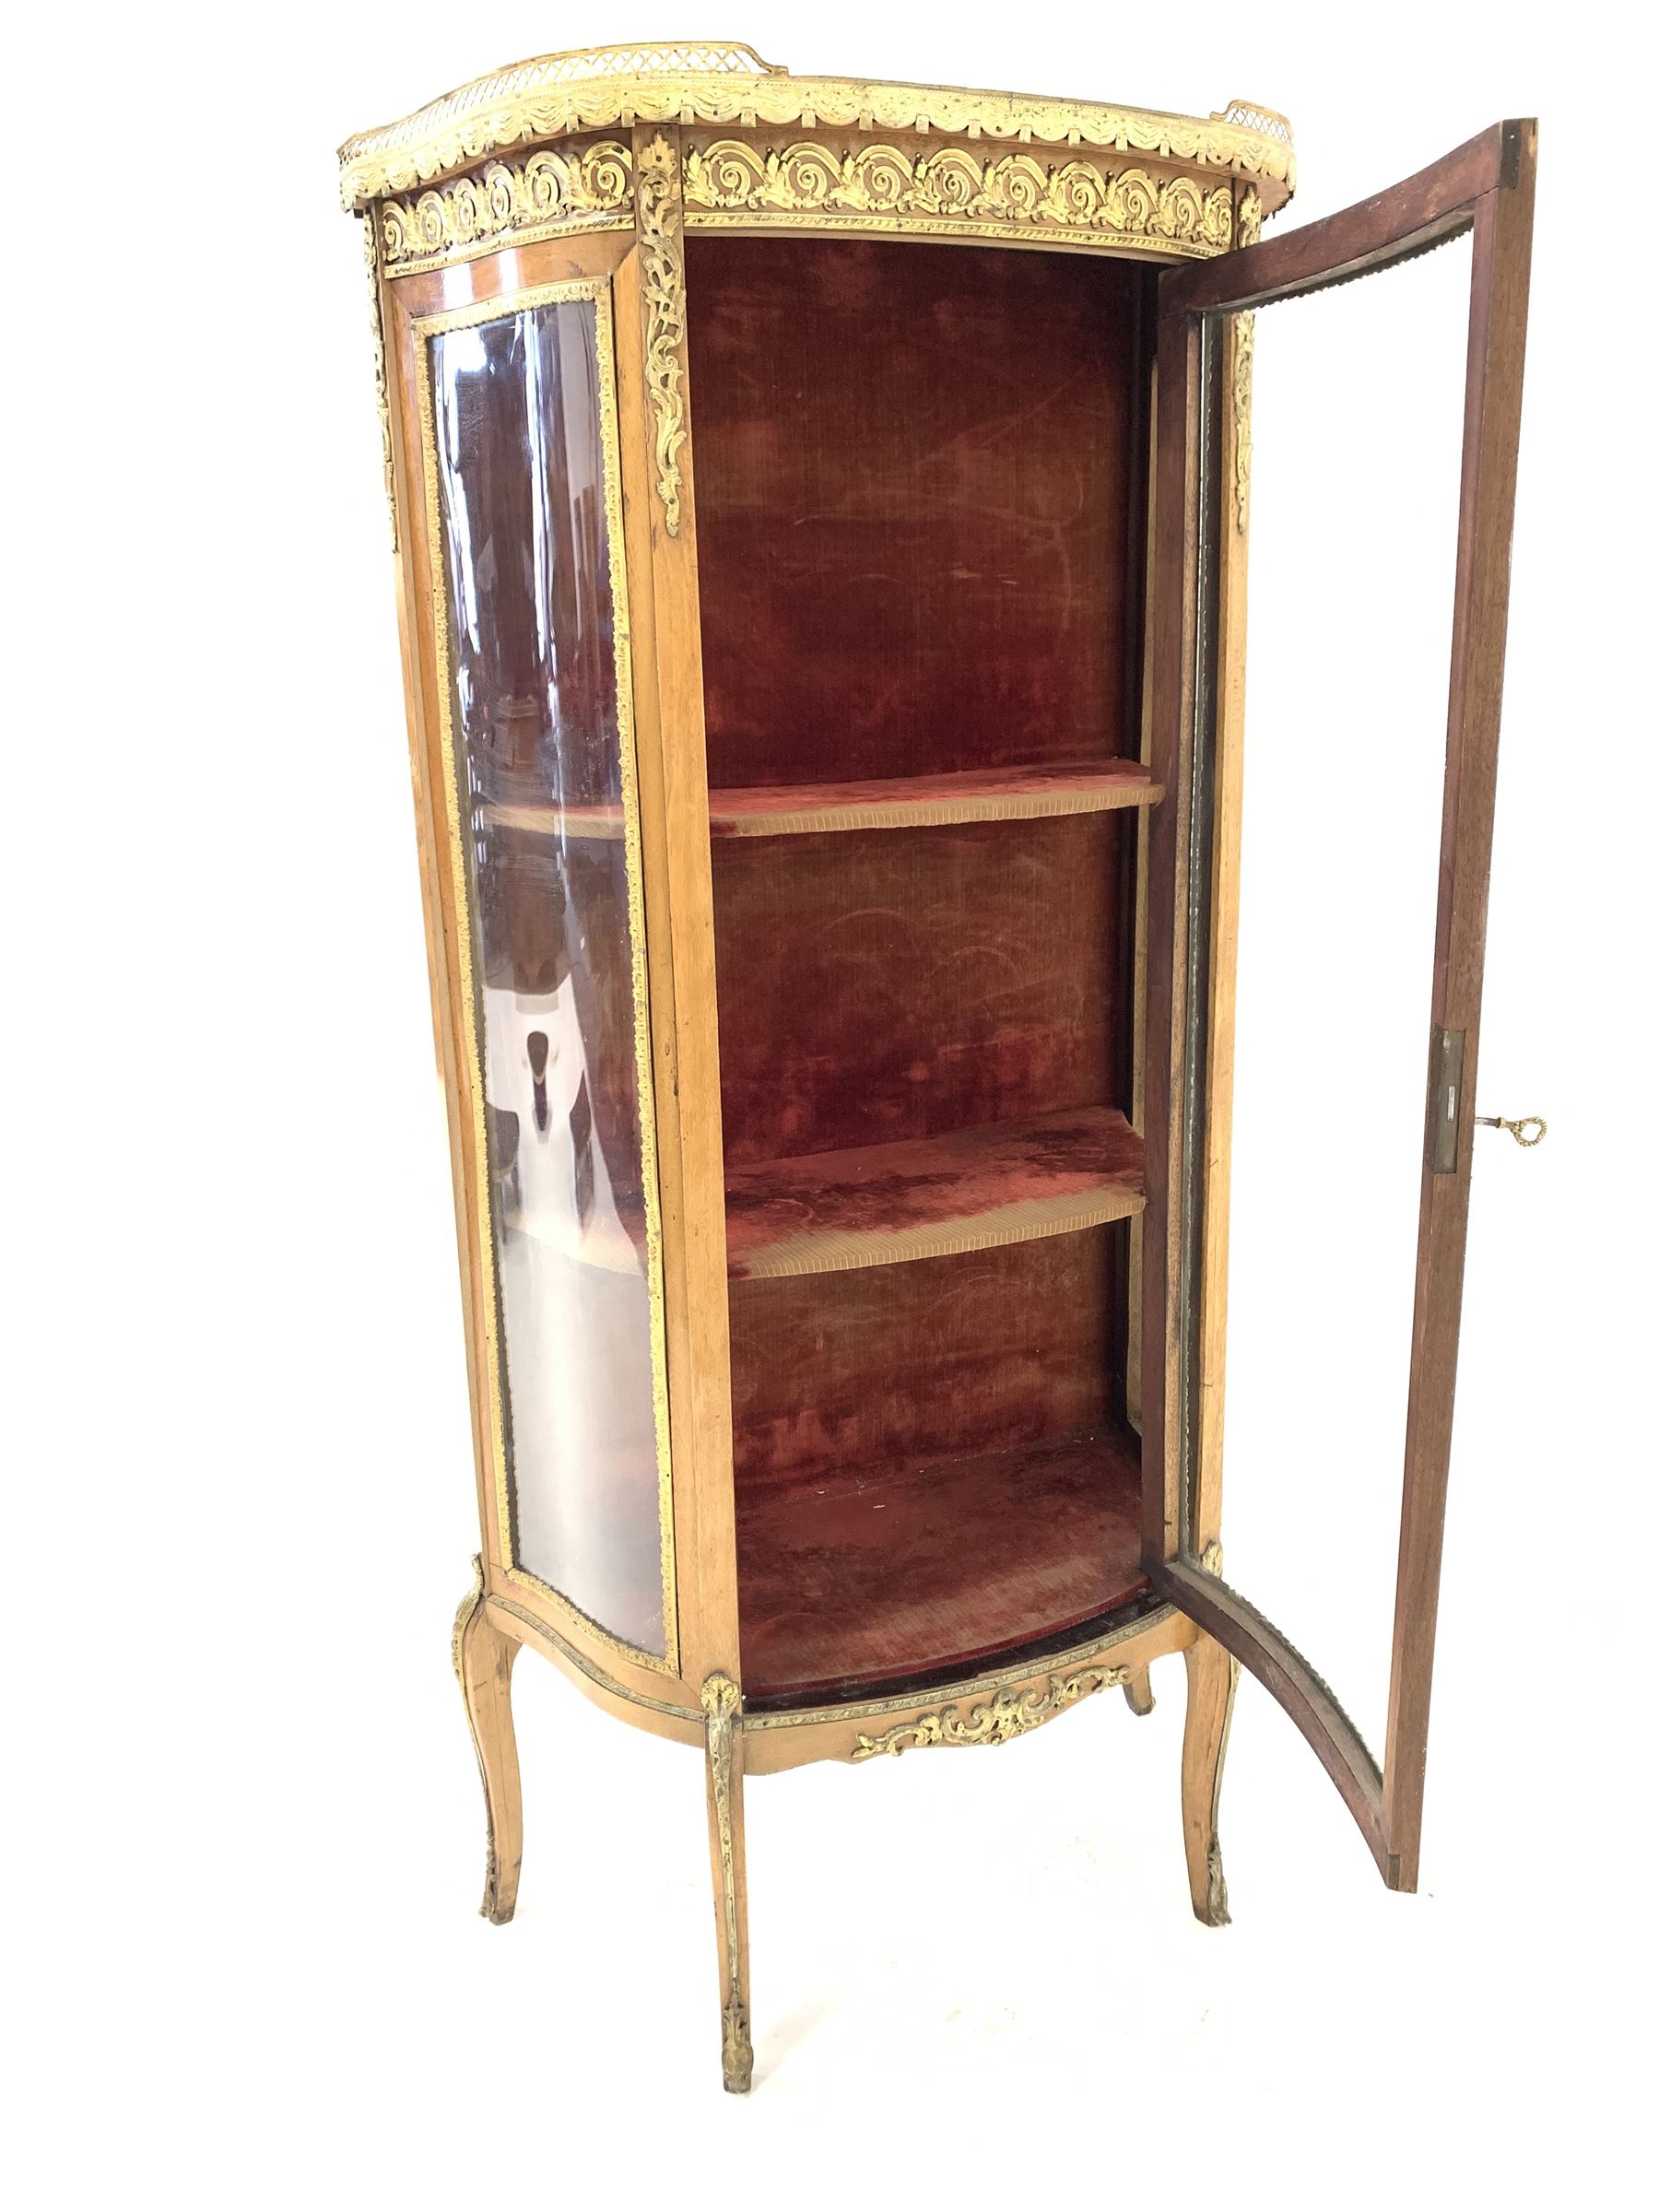 20th century French bow front vitrine - Image 2 of 4